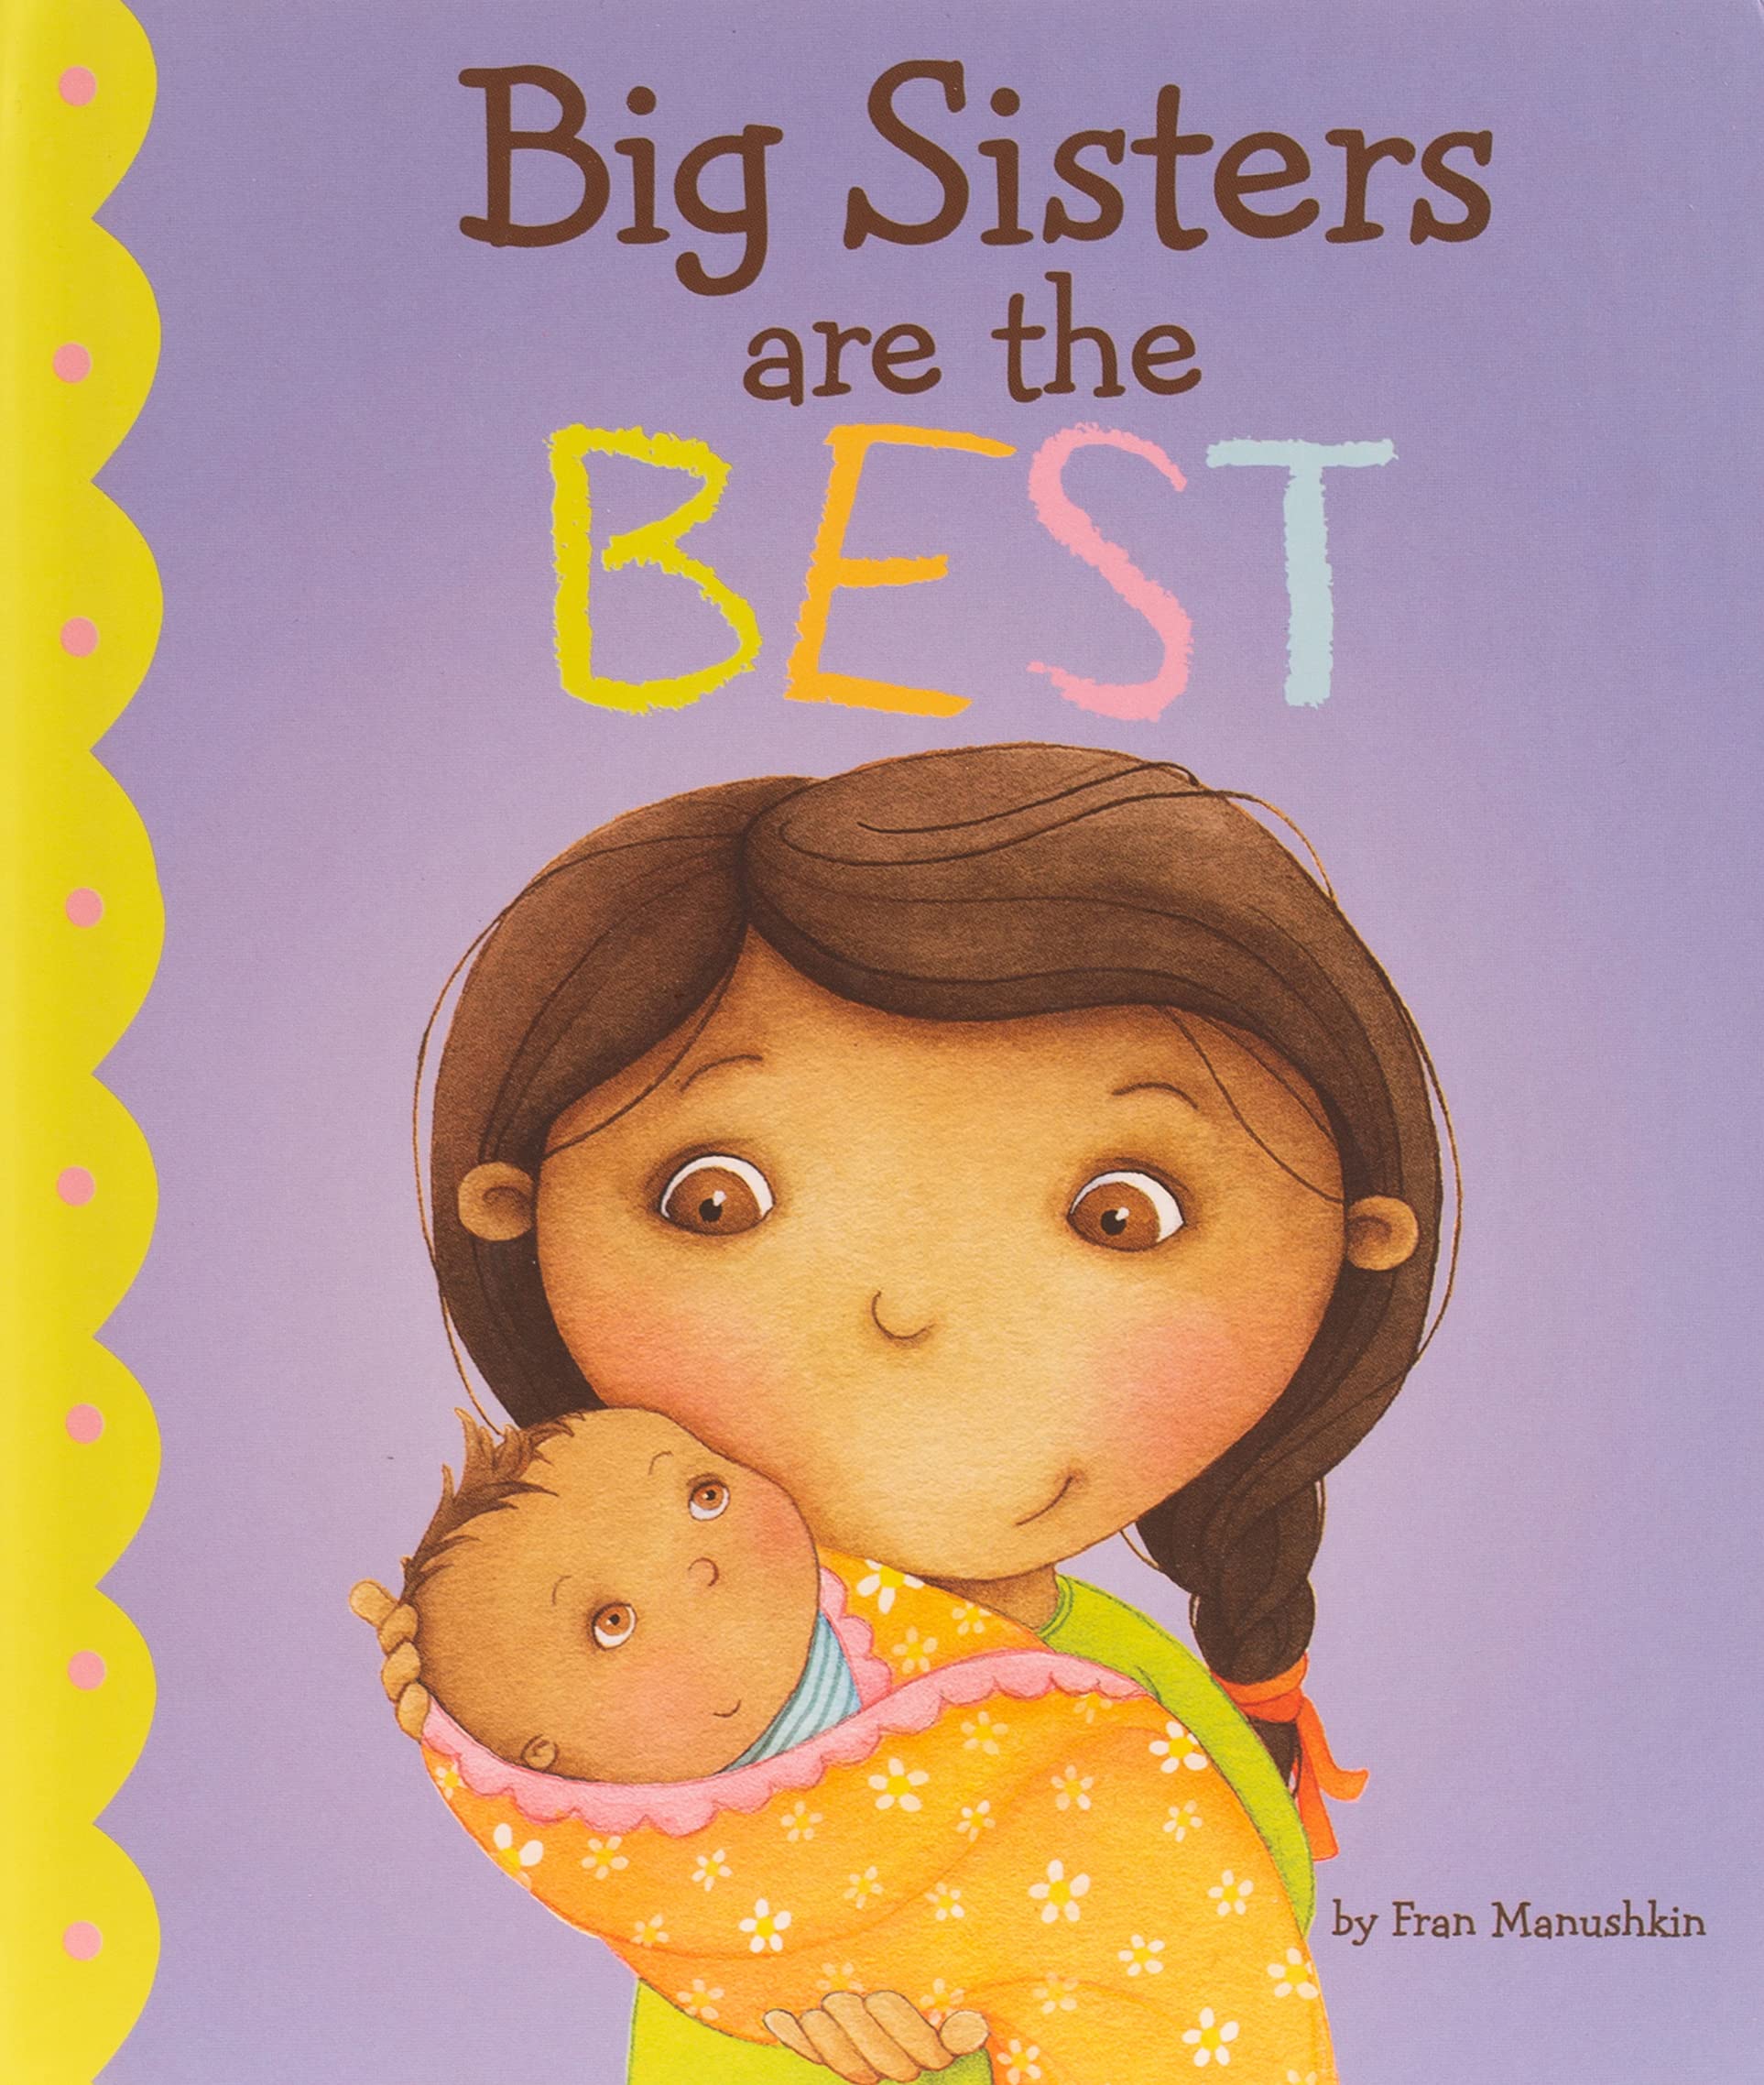 My sister to read books. Big sister. Little sister книги английские. The best Издательство. A Gift book to my sister.